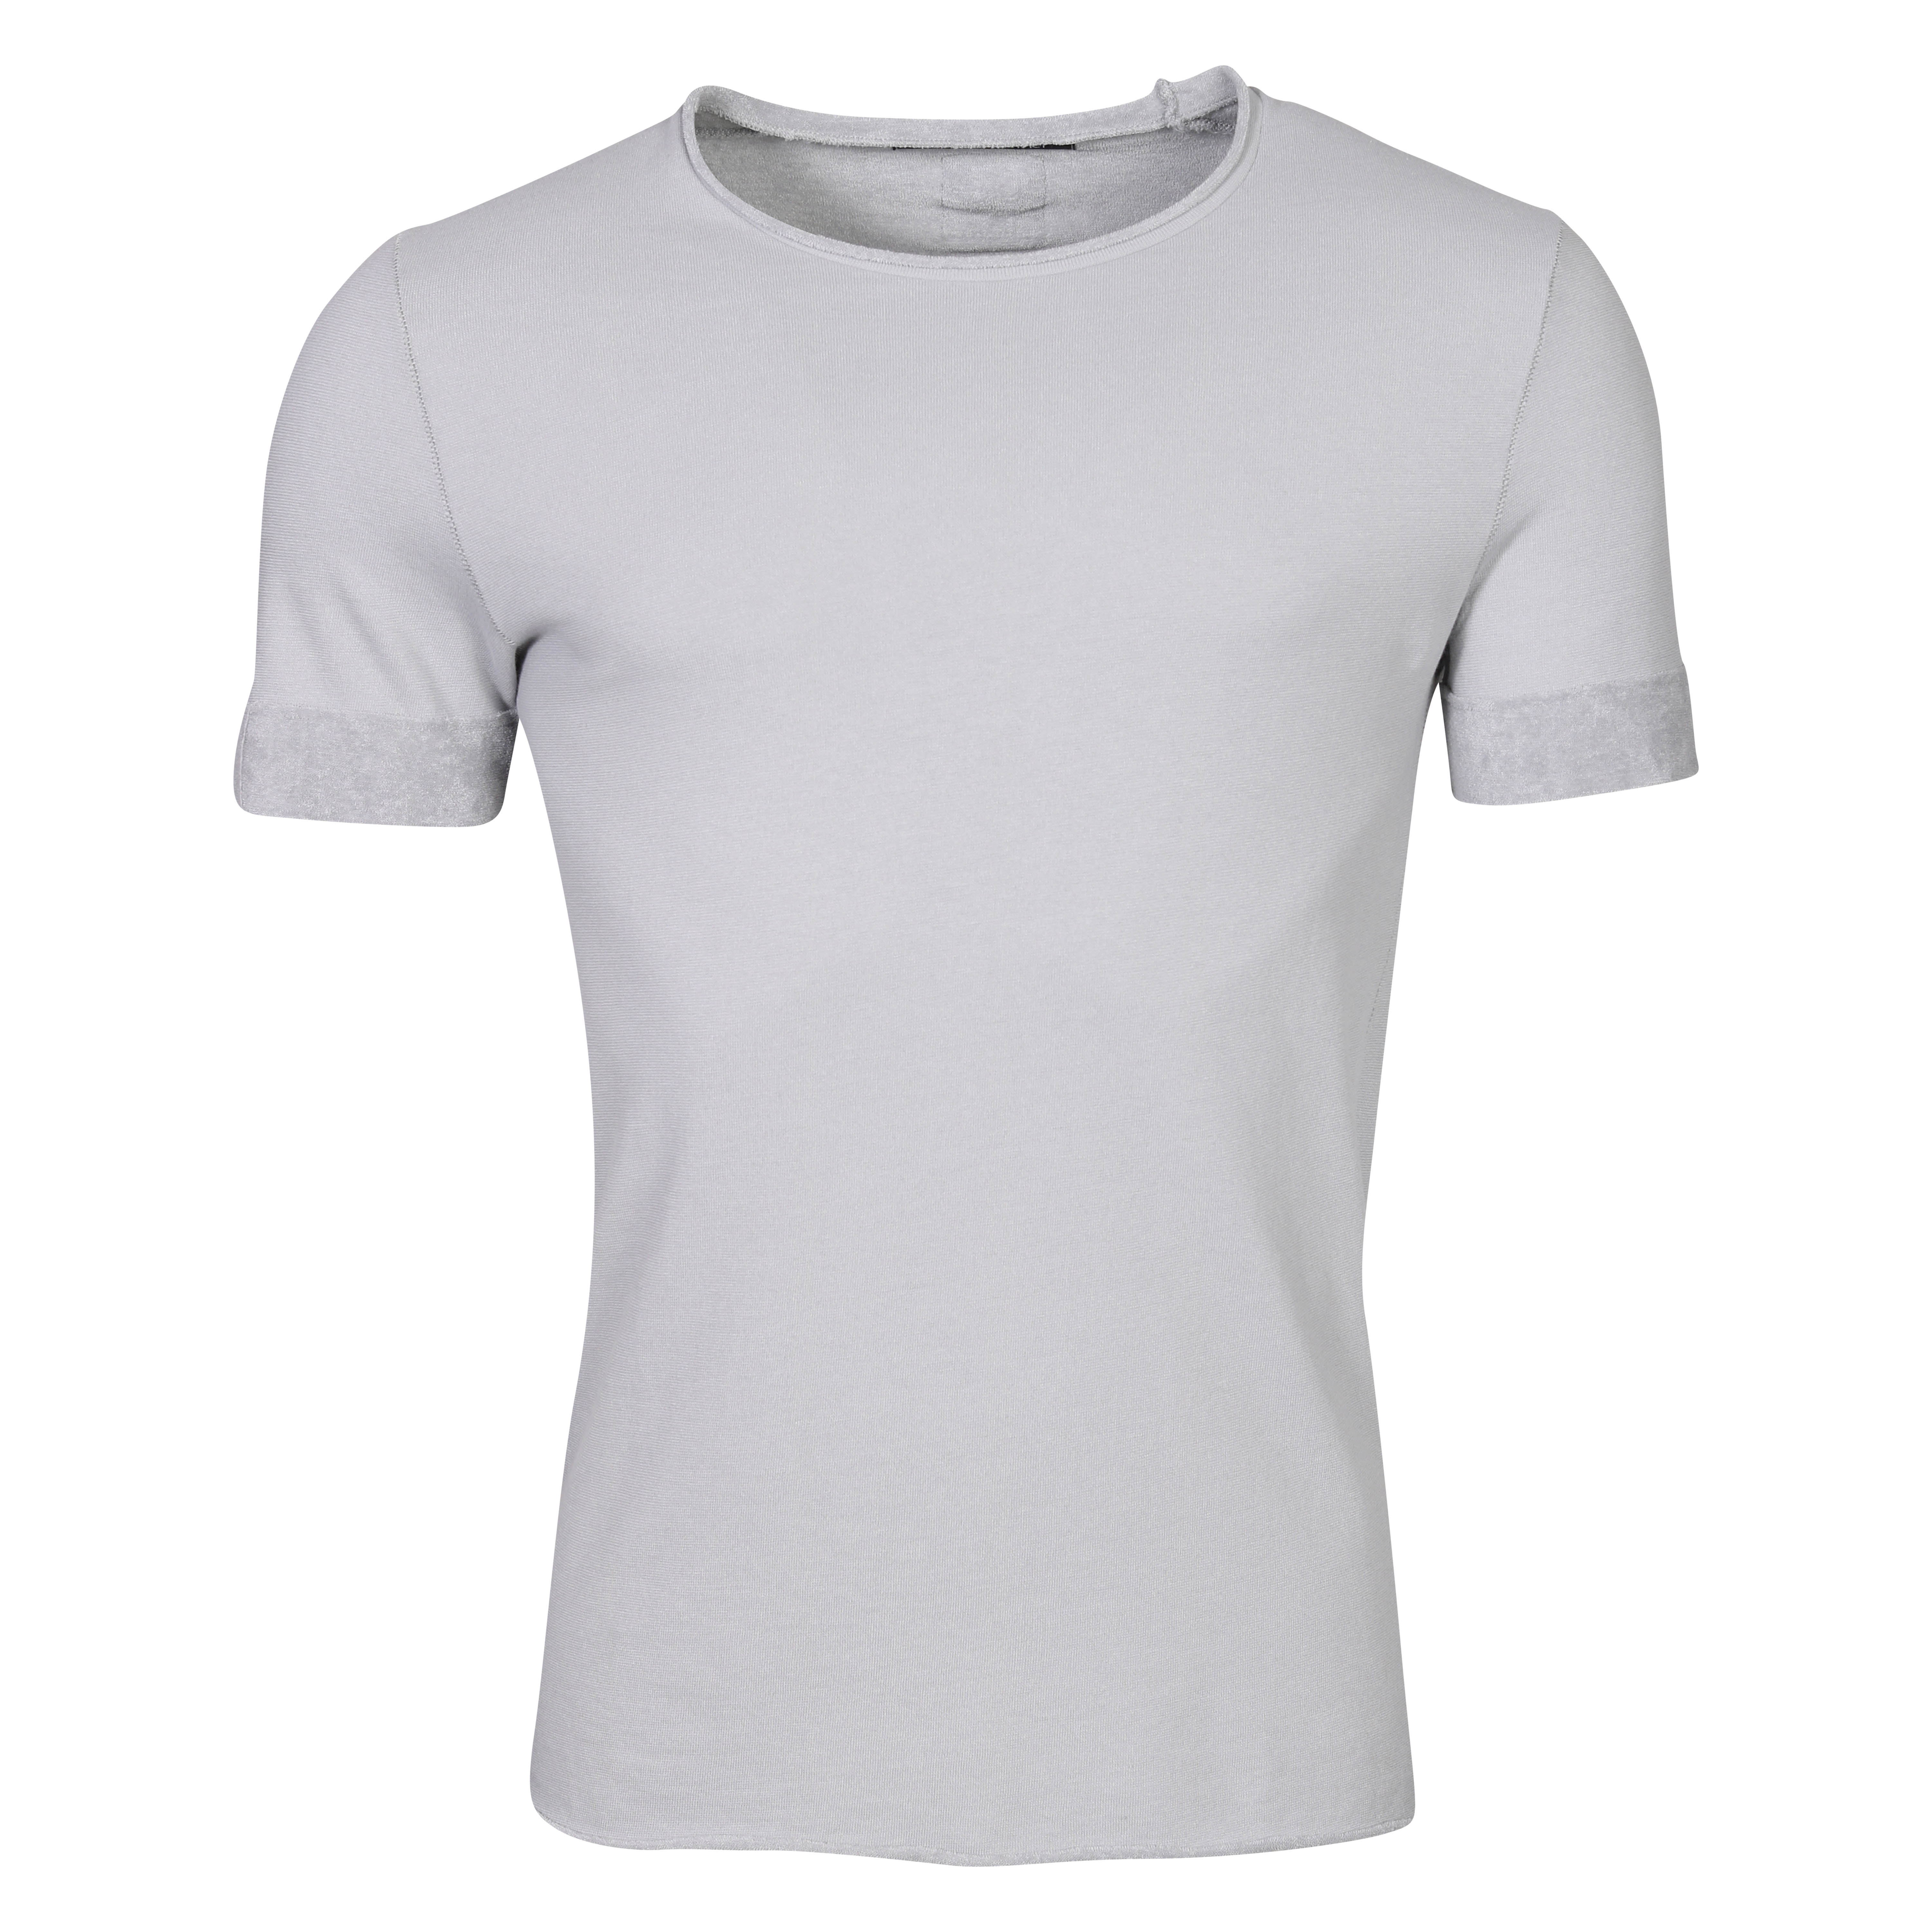 Hannes Roether Frottee T-Shirt in Mouse